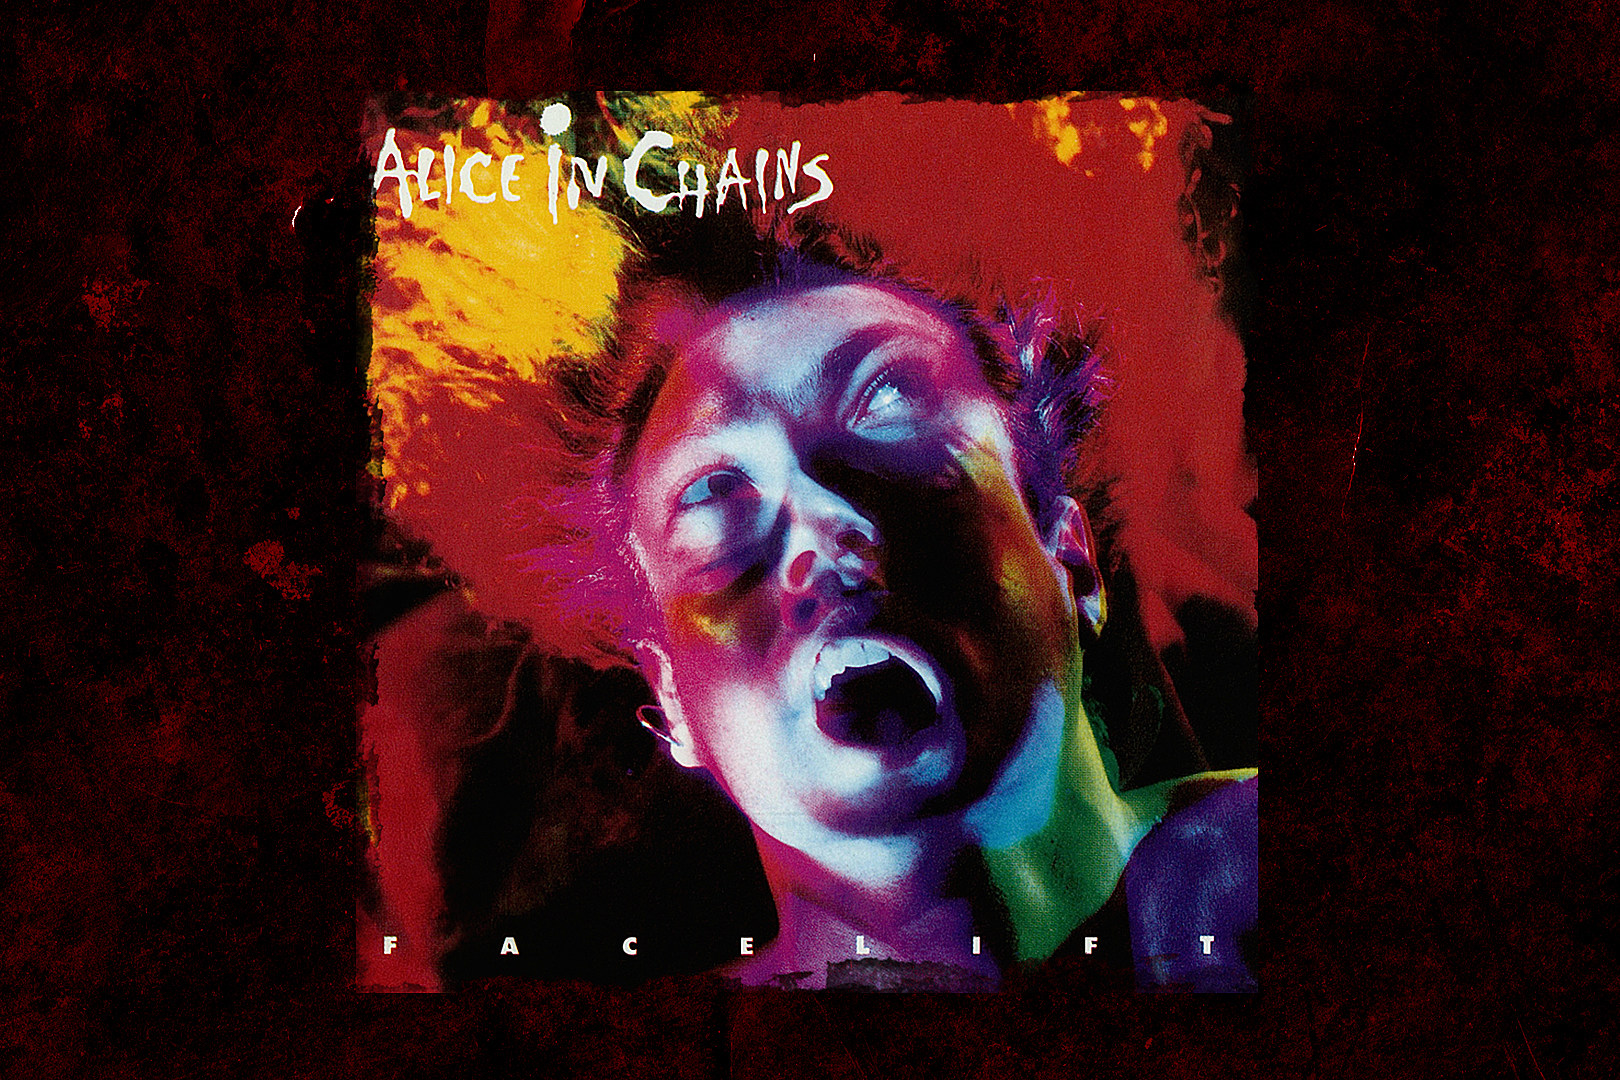 Alice In Chains Release Statement About Mike Starr [AUDIO]